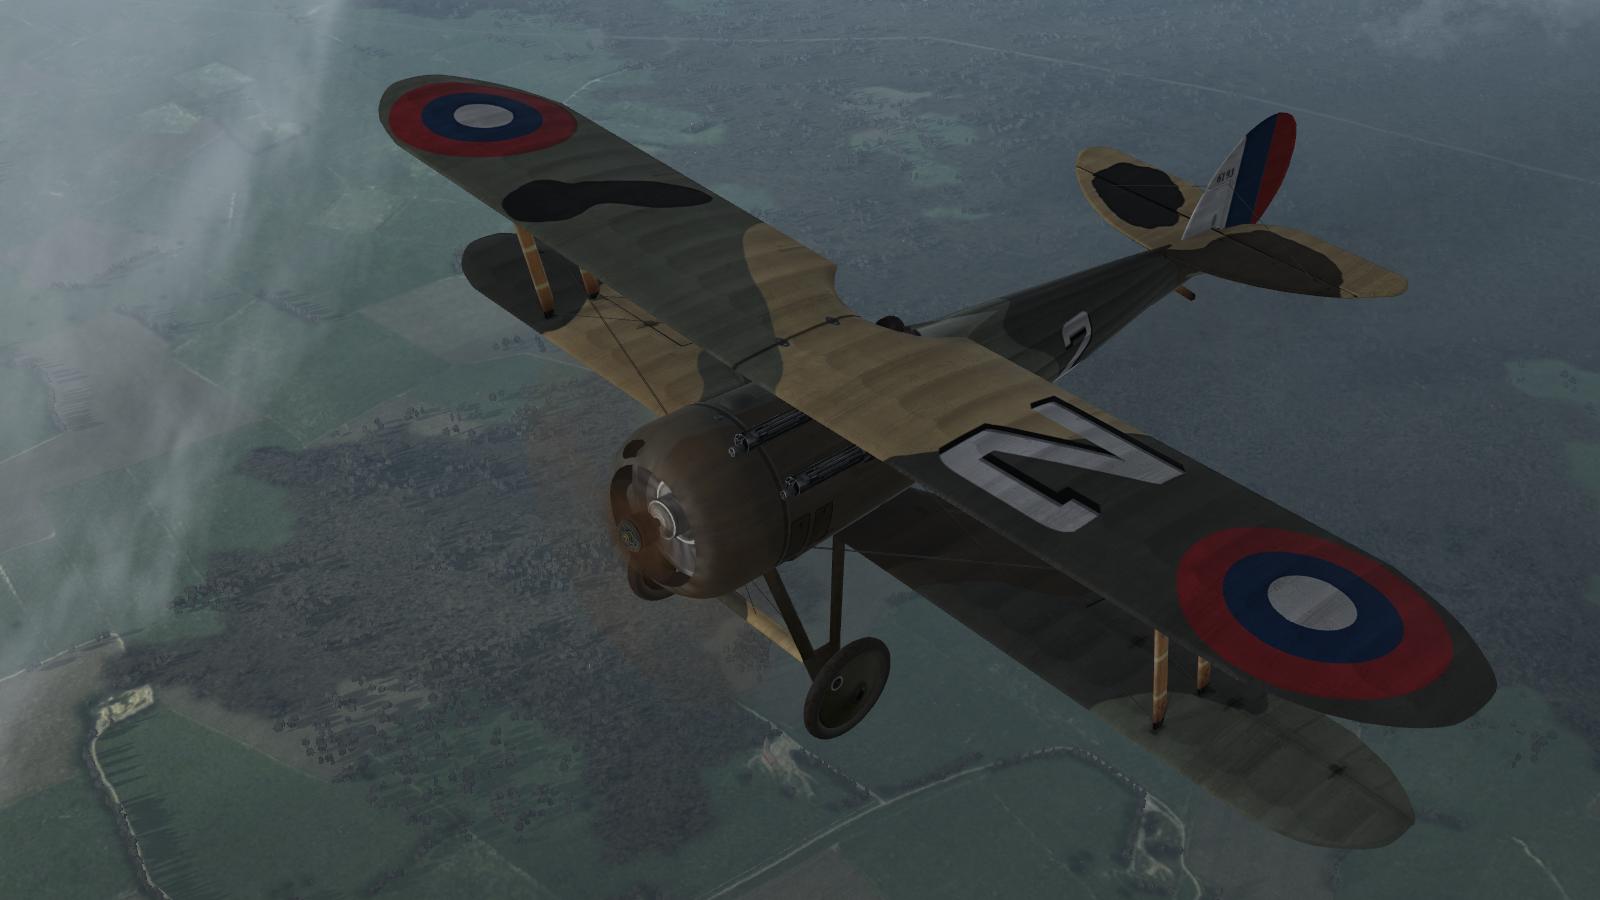 Wings over Flanders Fields - Nieuport 28, Raoul Lufberry, 94th Aero.